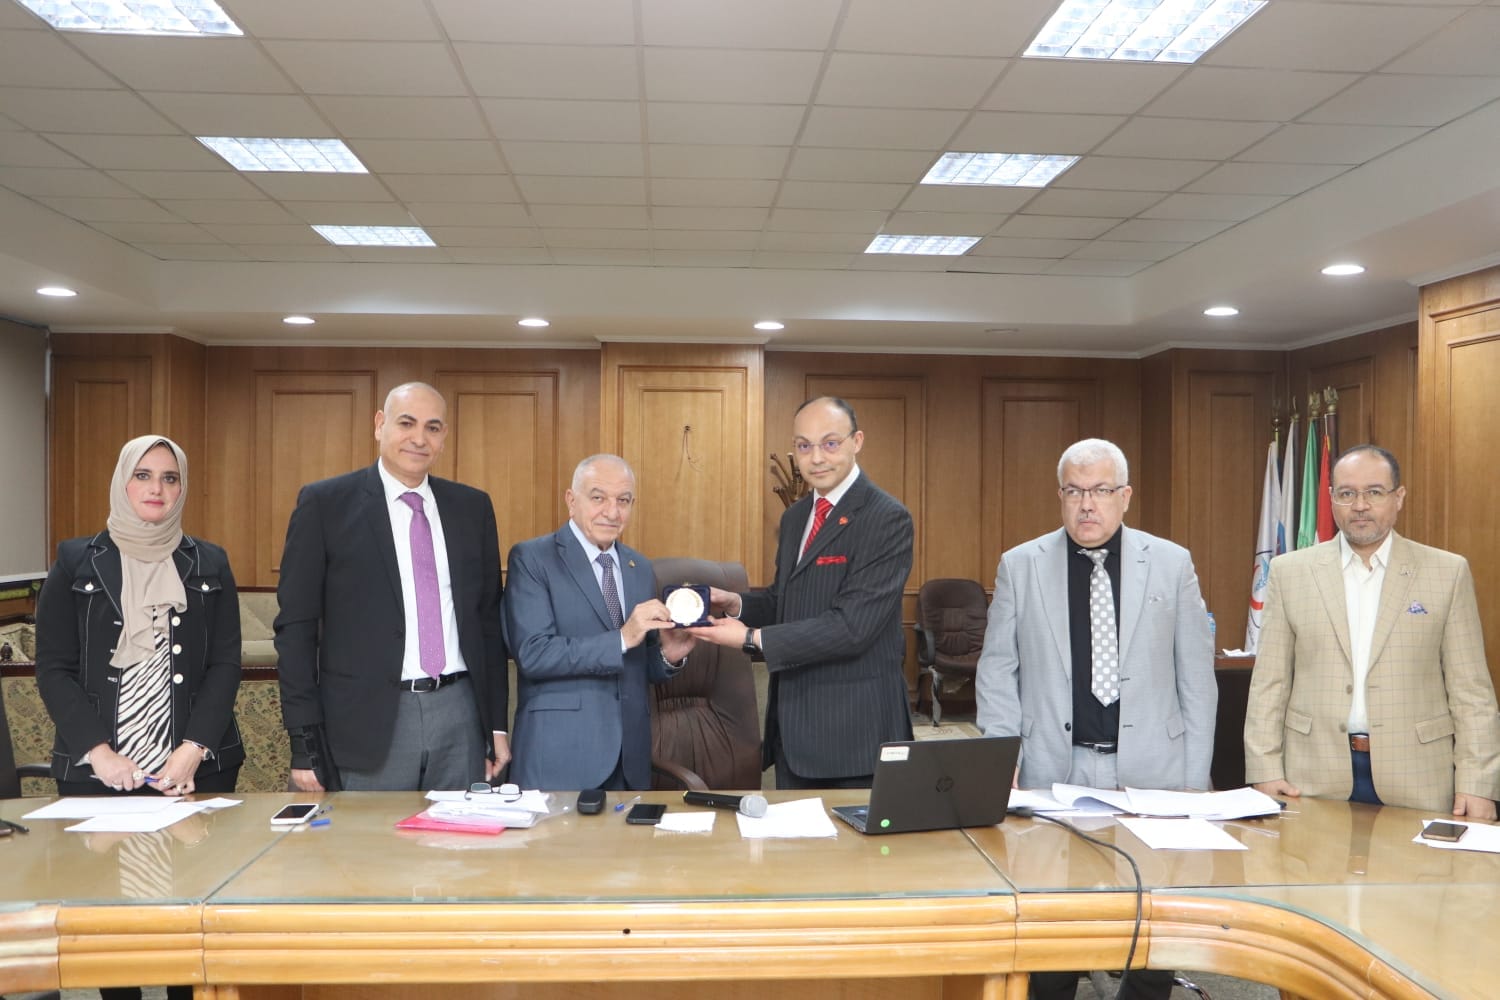 The College Council honors Dr. Hussein Nada, former head of the Menoufia Doctors Syndicate